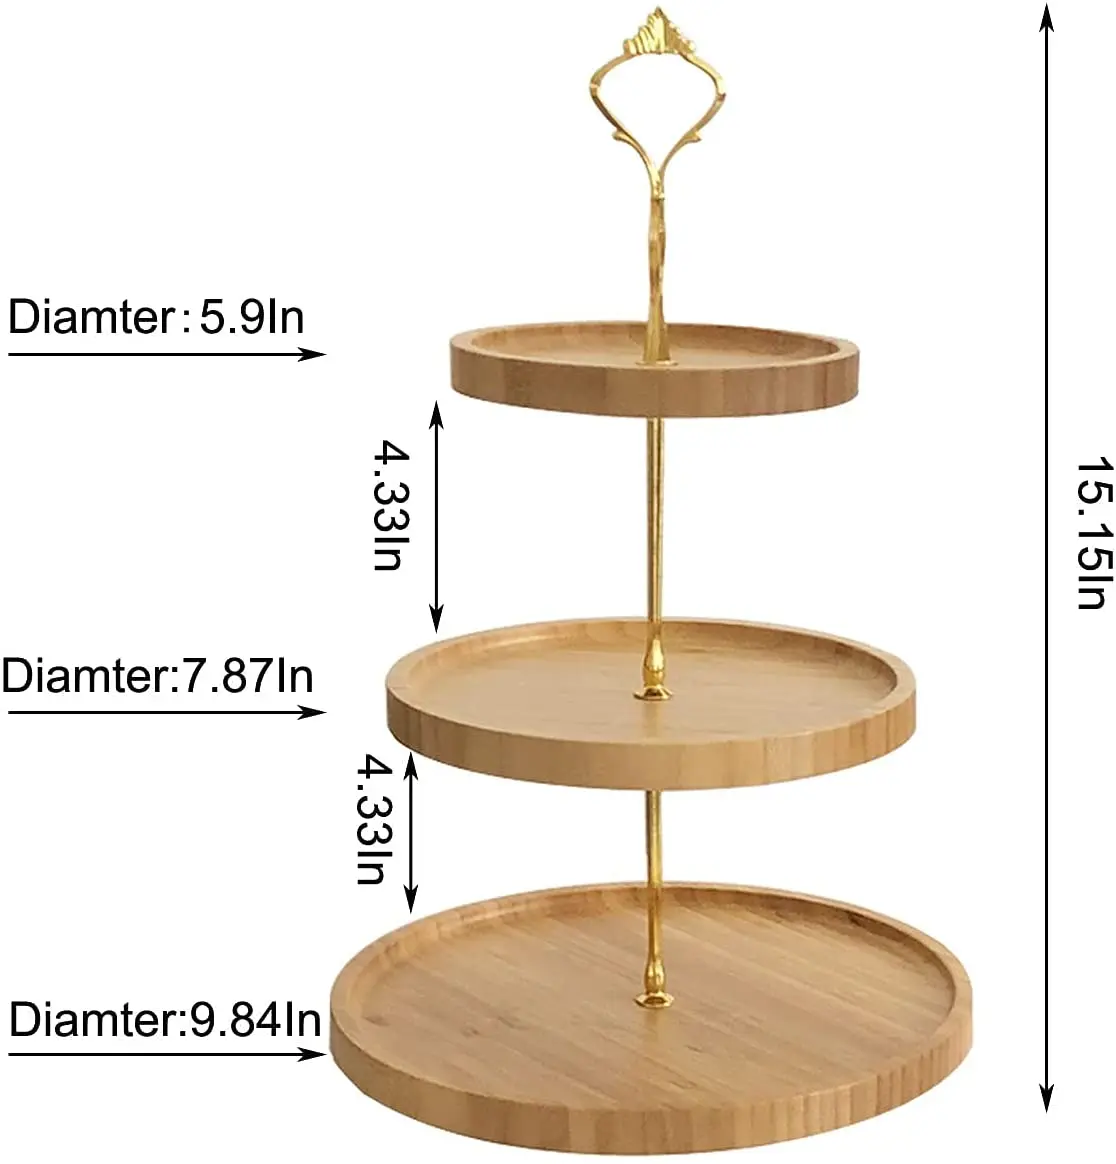 3 Tier Round Shape Tiered Tray Decorative Bamboo Food Serving Tray For Fruit Cake